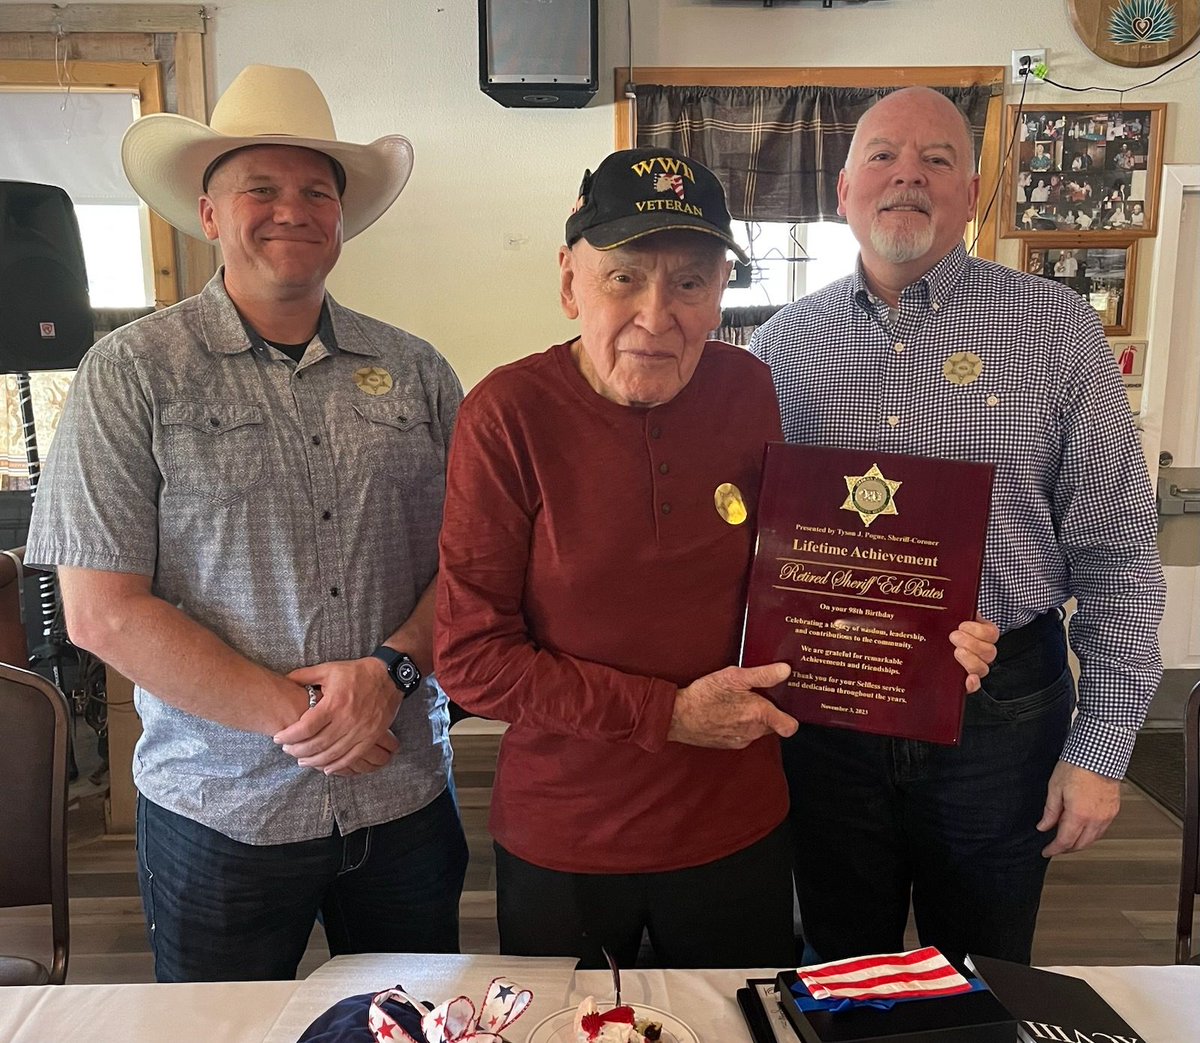 Madera County Sheriff Ed Bates (ret) with Present and Past Sheriff's on his 98th Birthday celebration at the Hitchin' Post restaurant in Ahwahnee, CA